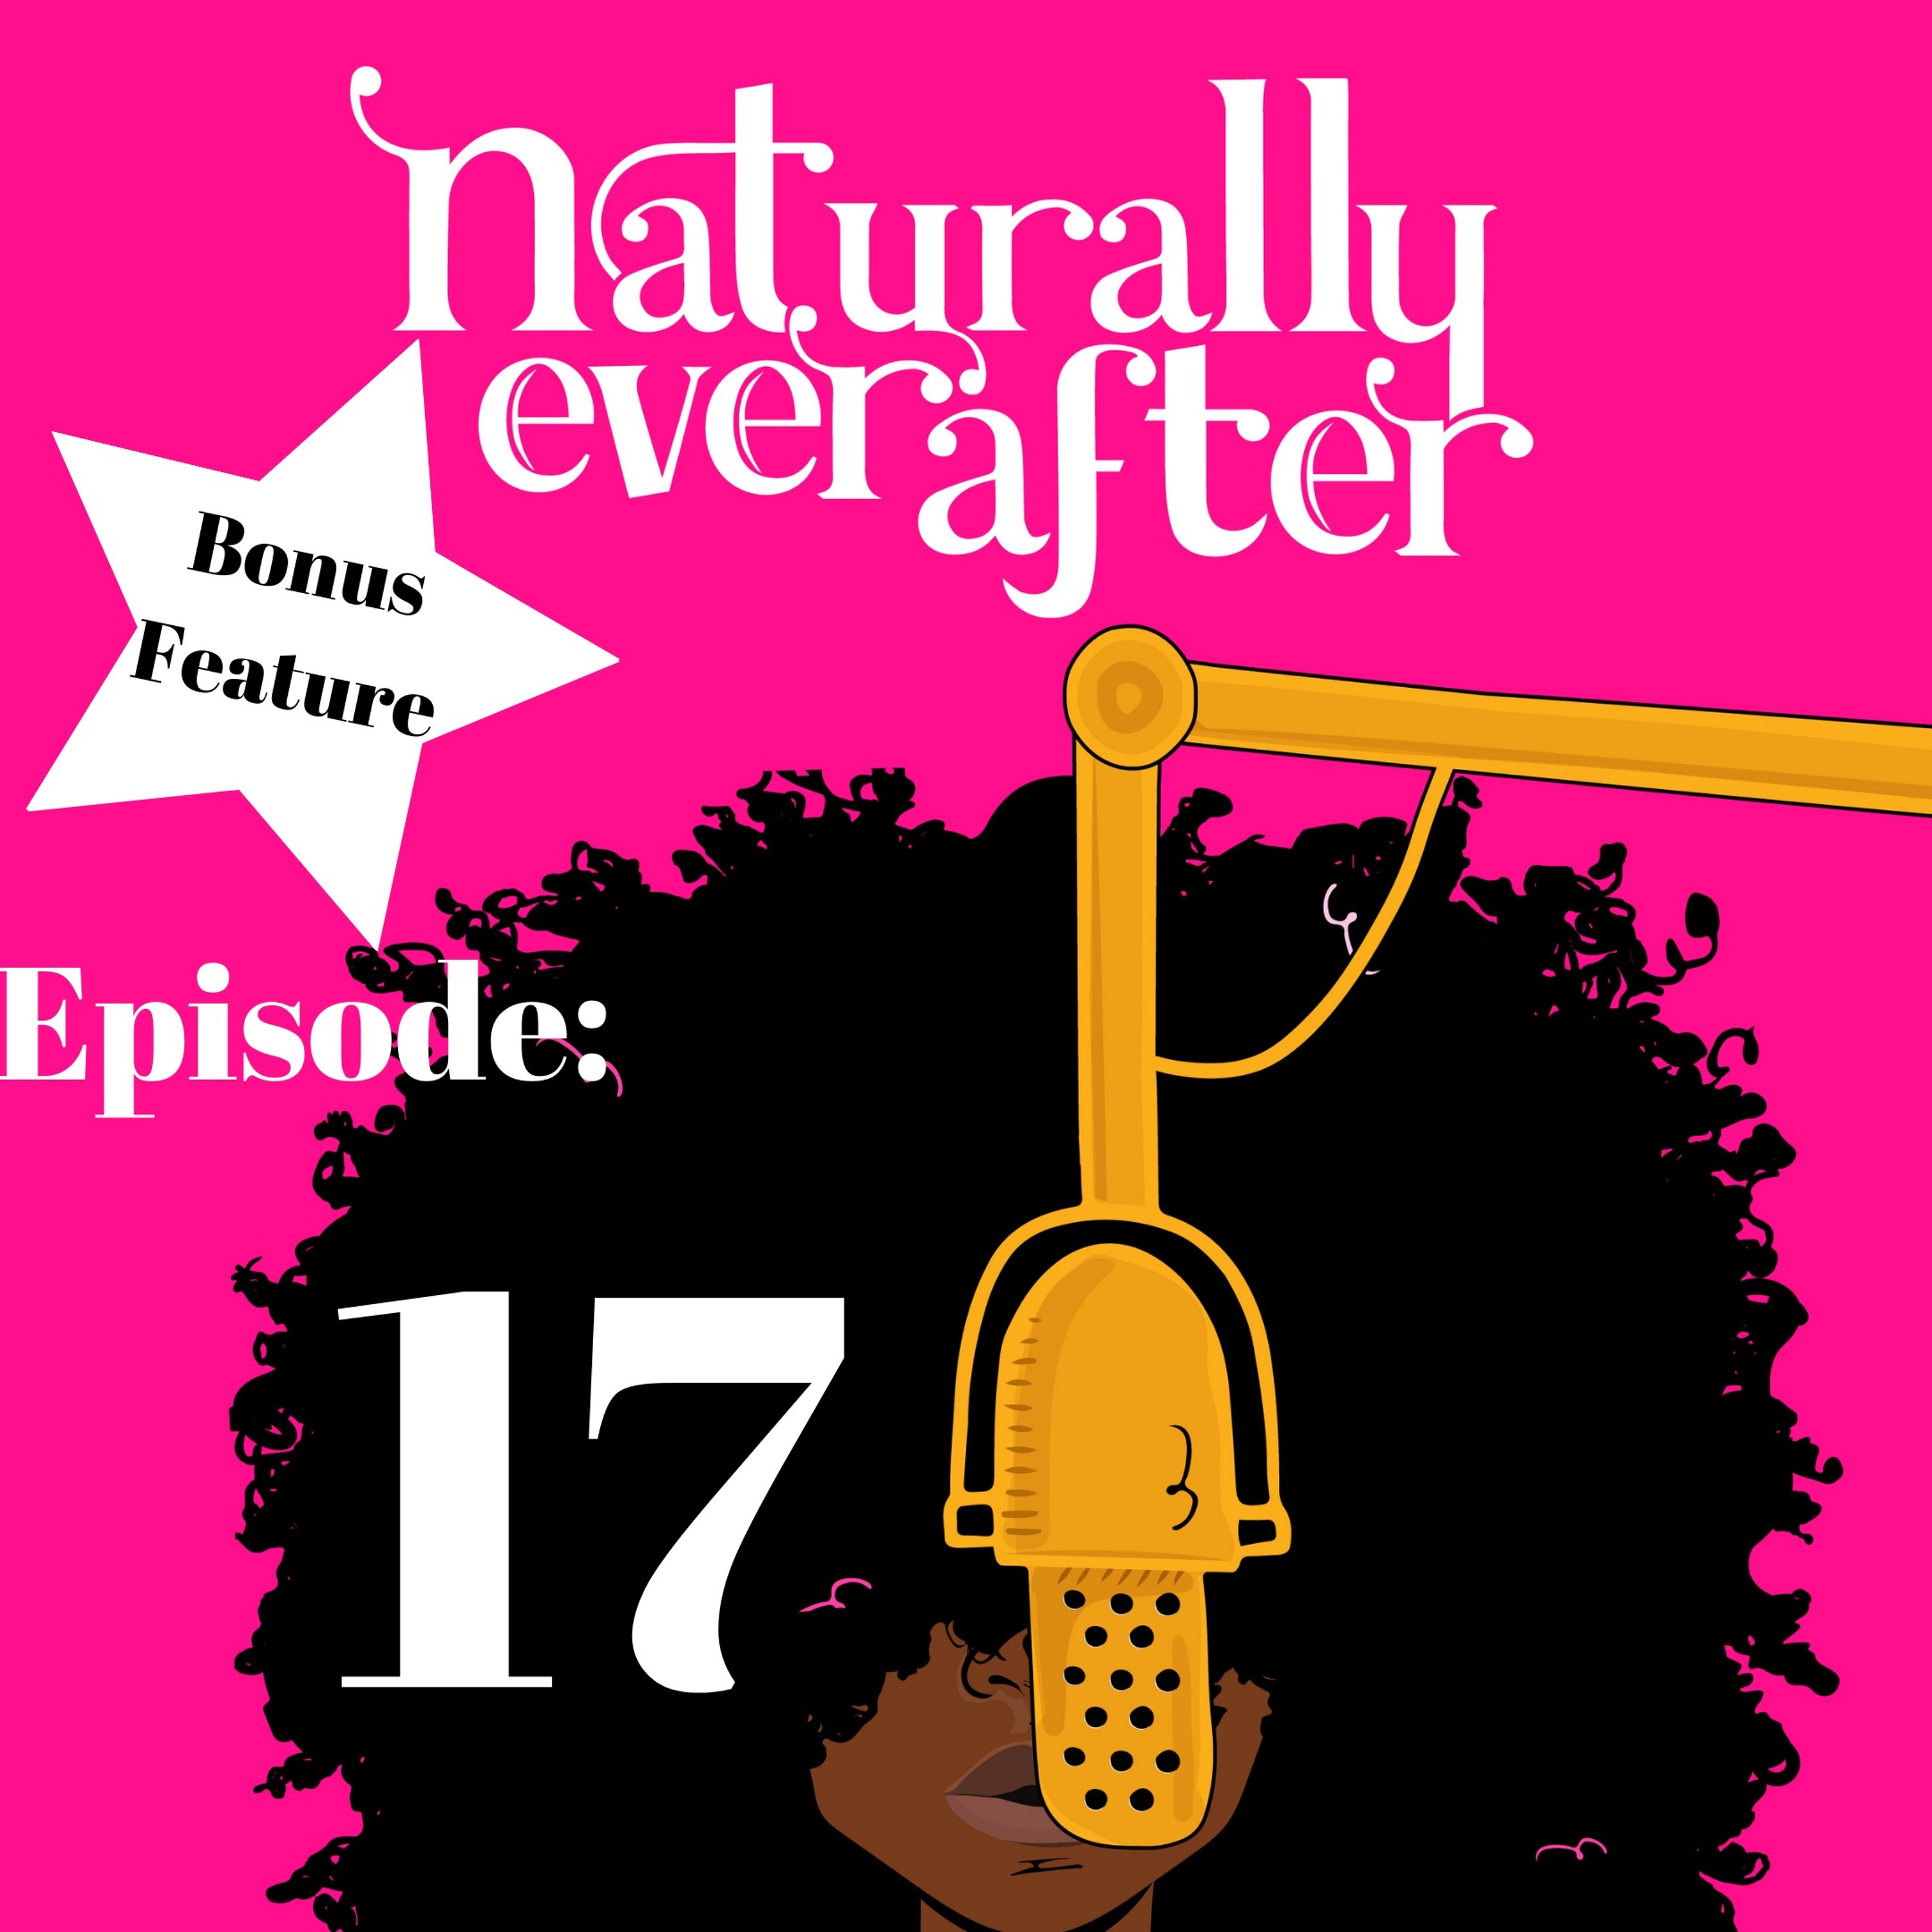 Episode 17: Release! Featuring Amani Clotter